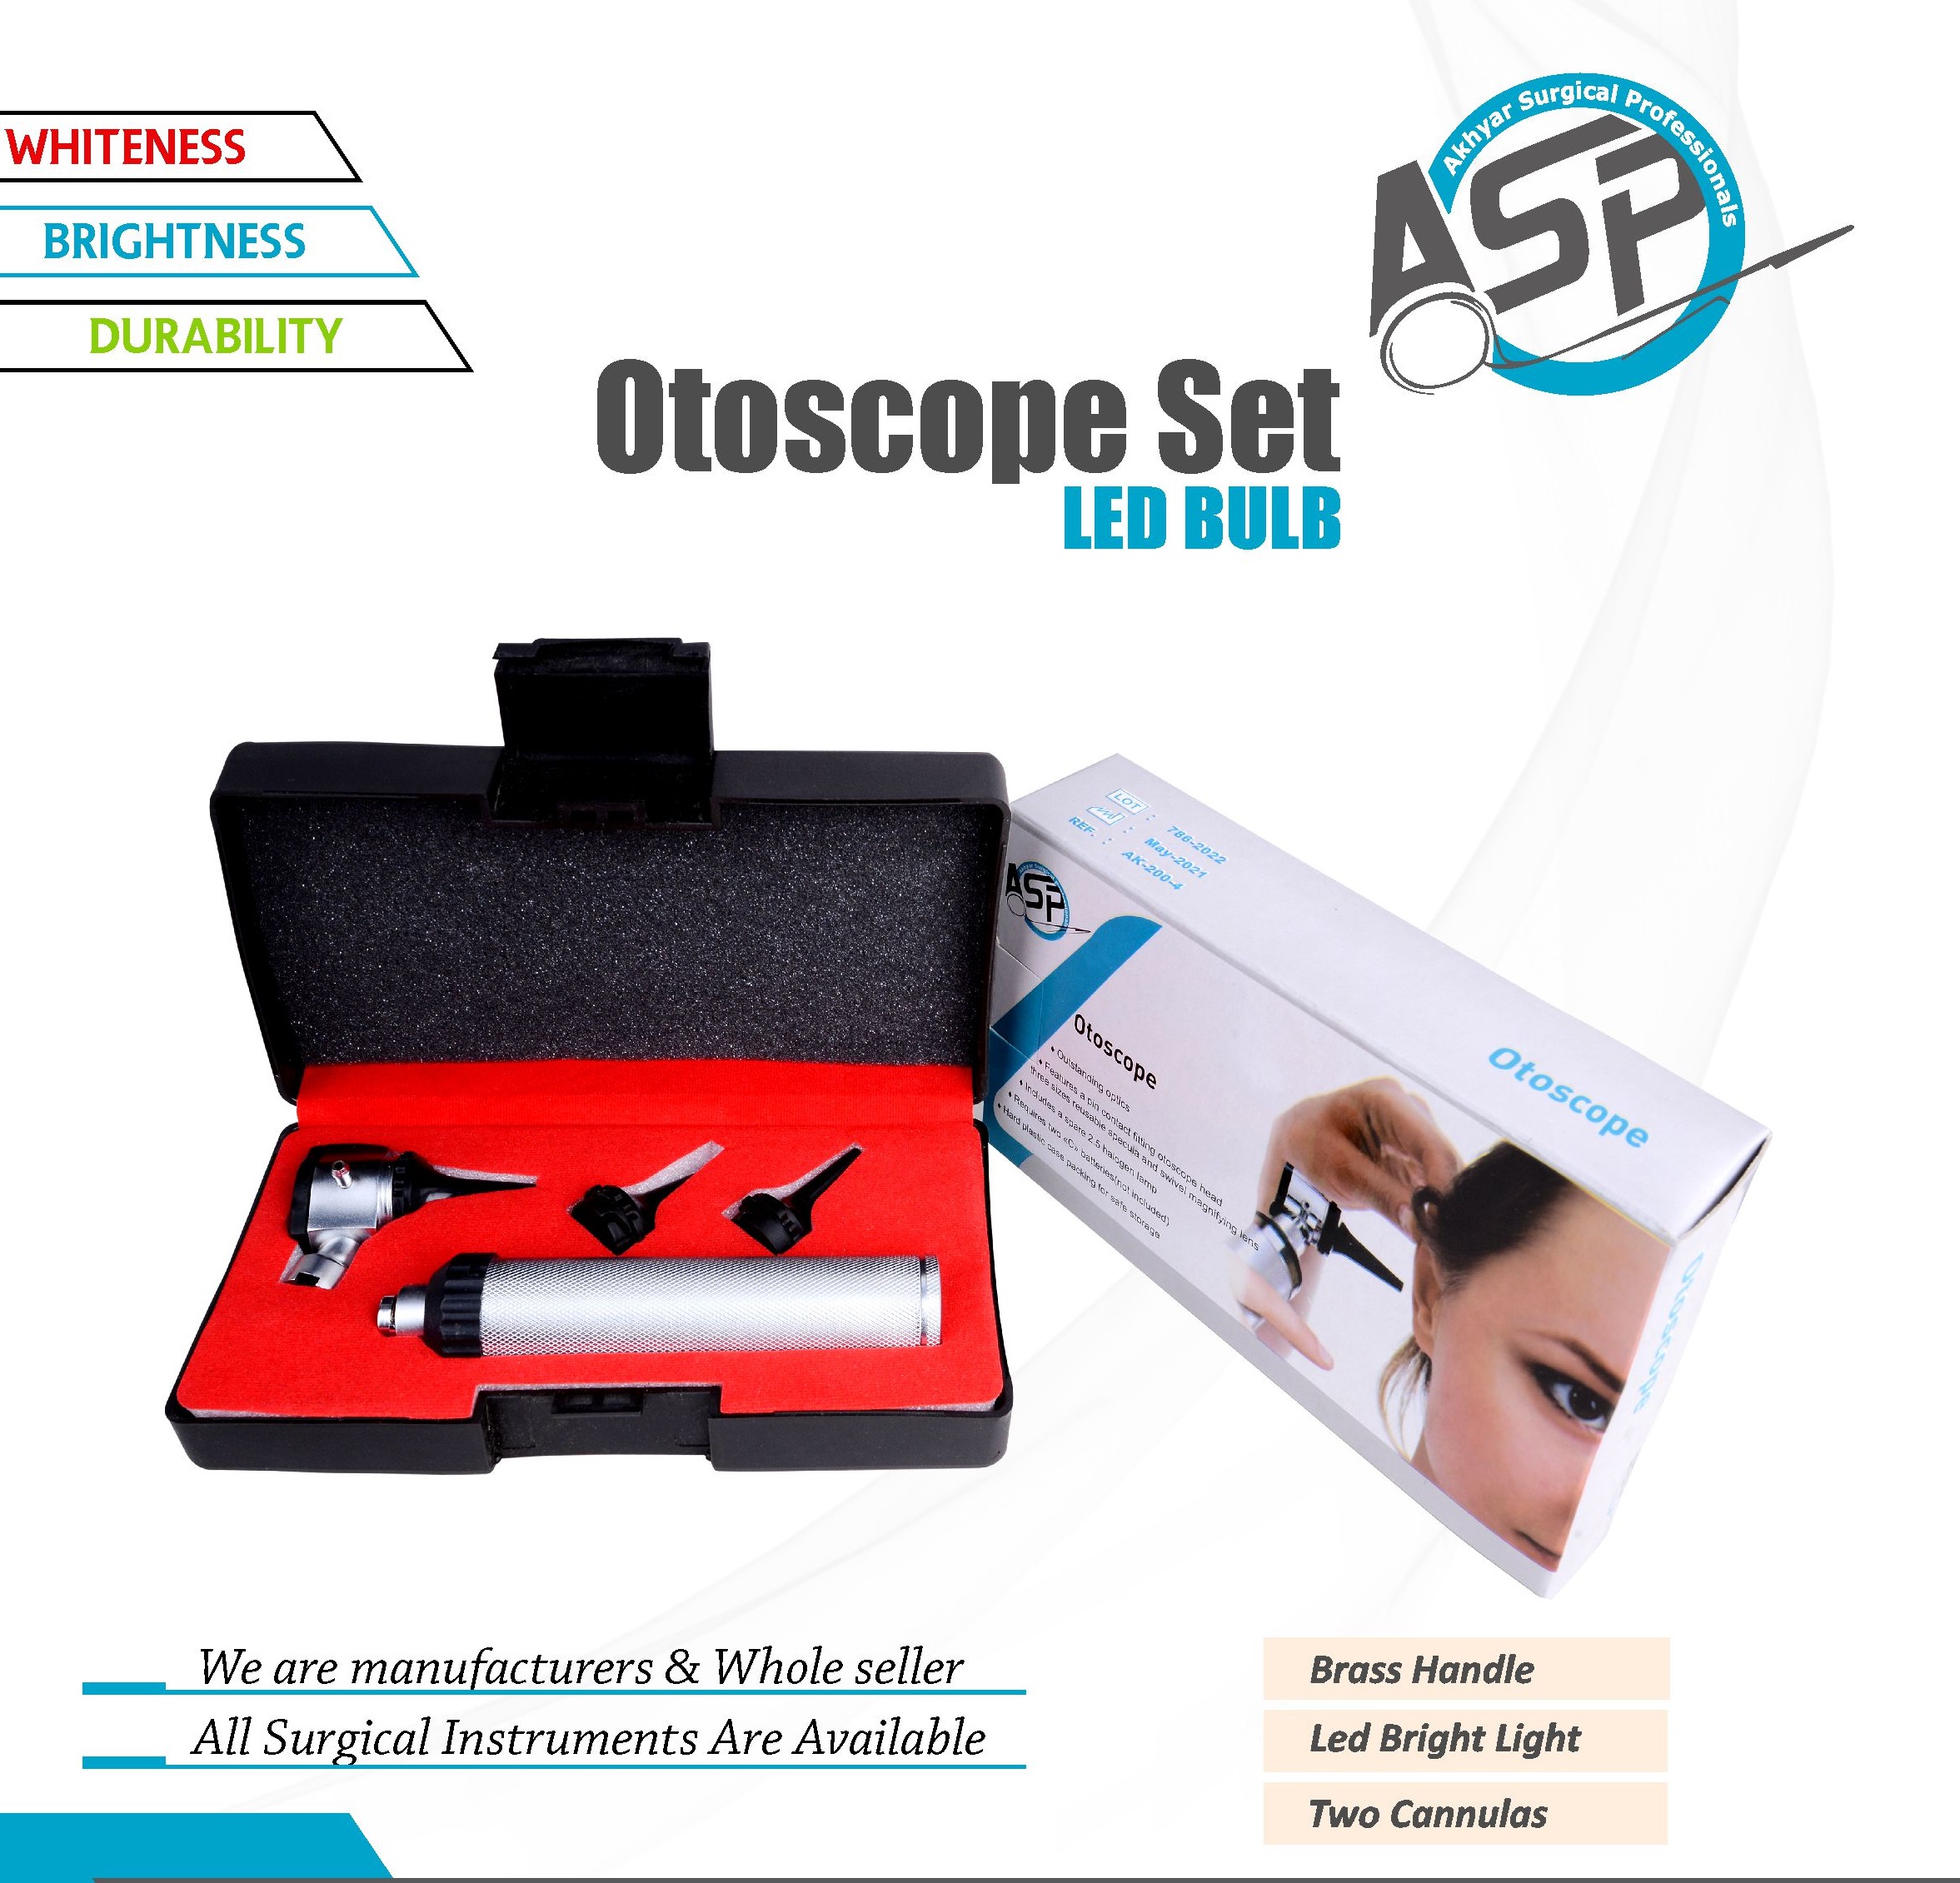 Brass Handle Otoscope Set from Akhyar Surgical Professionals